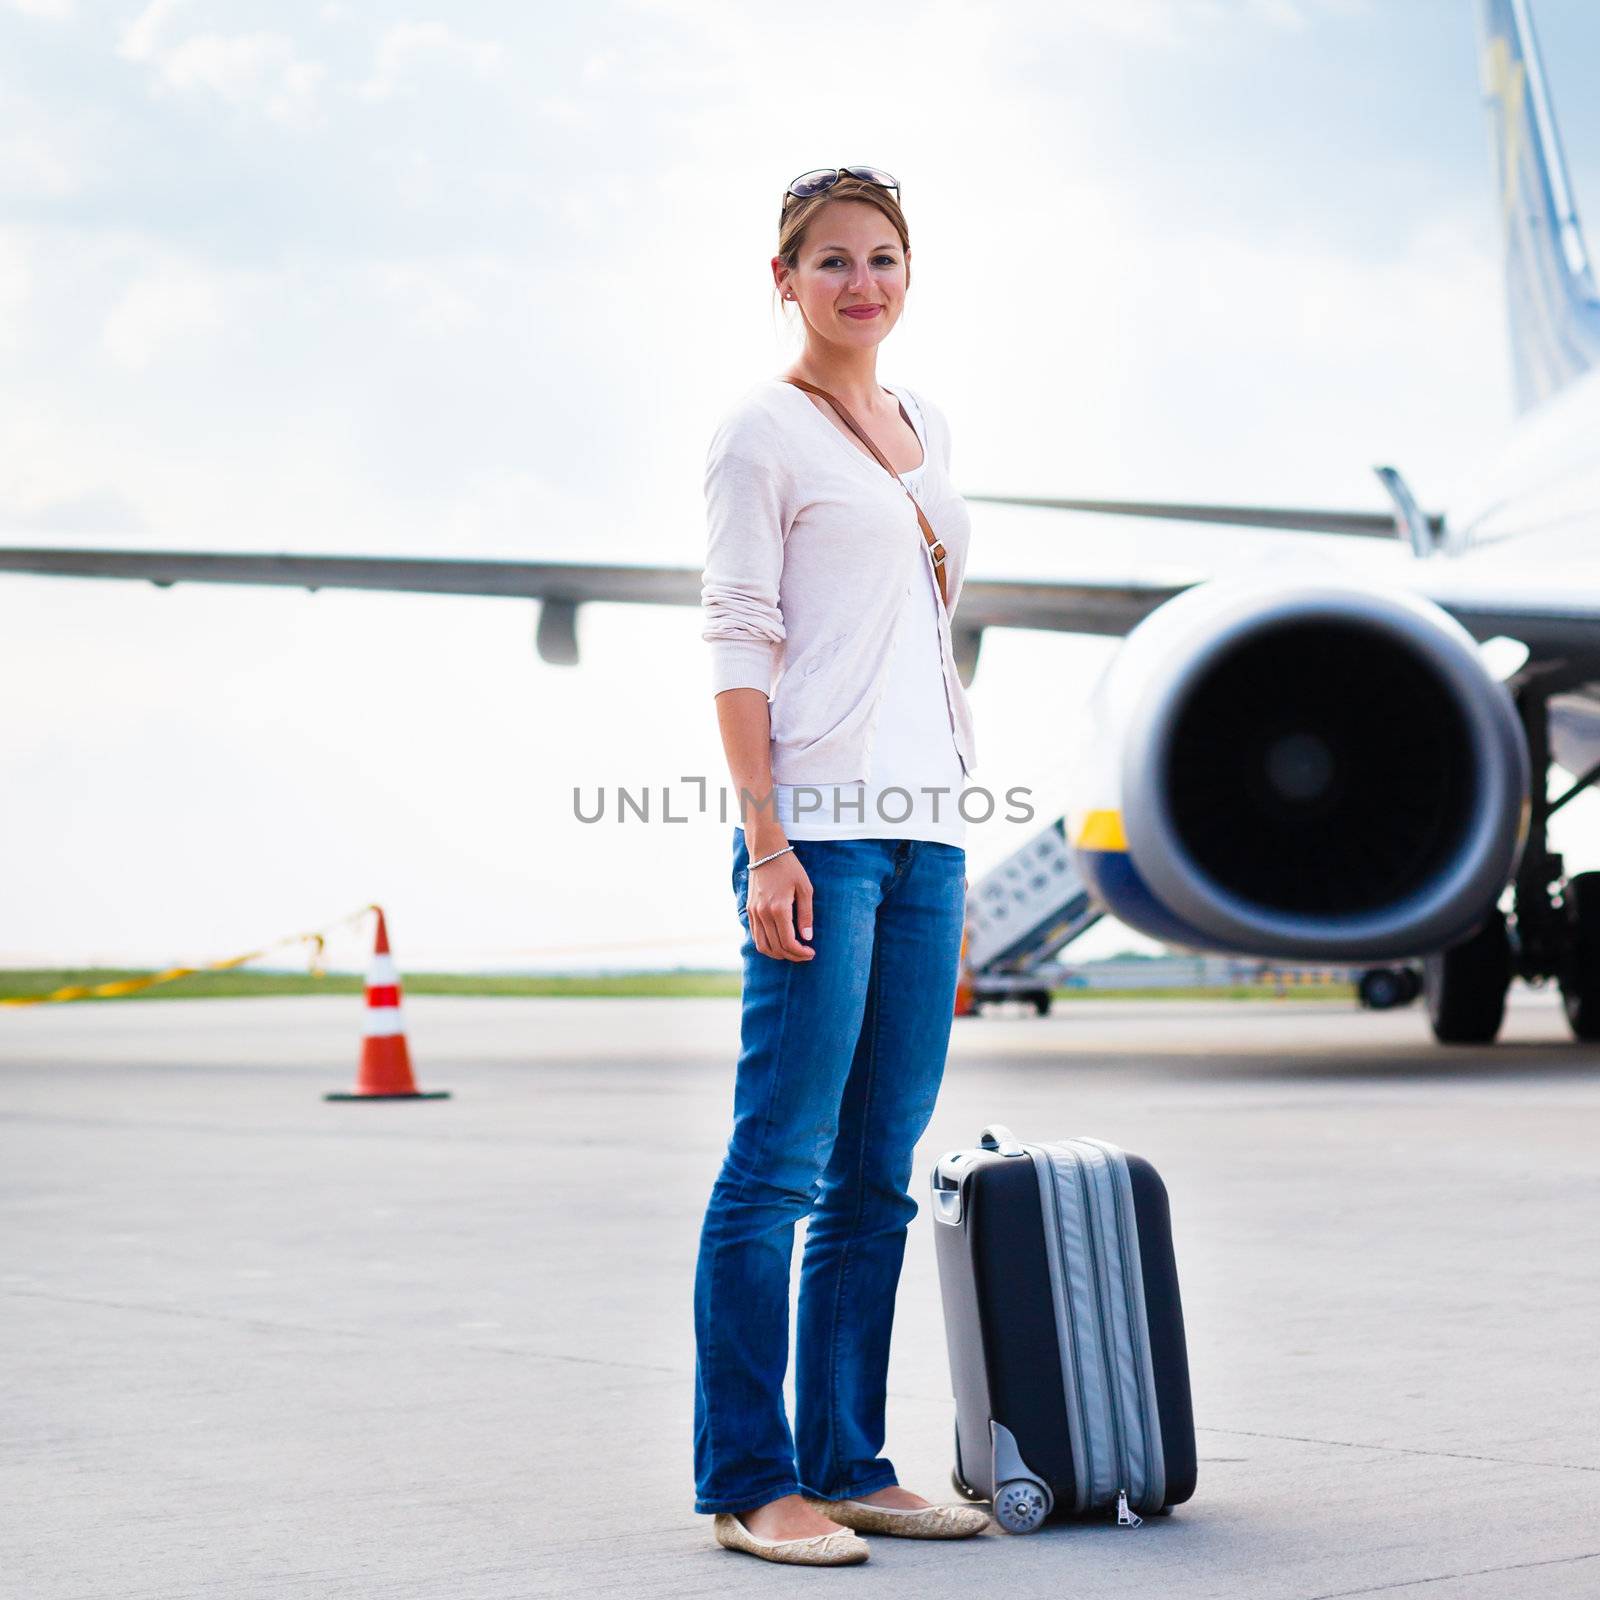 Young woman at an airport having just left the aircraft by viktor_cap